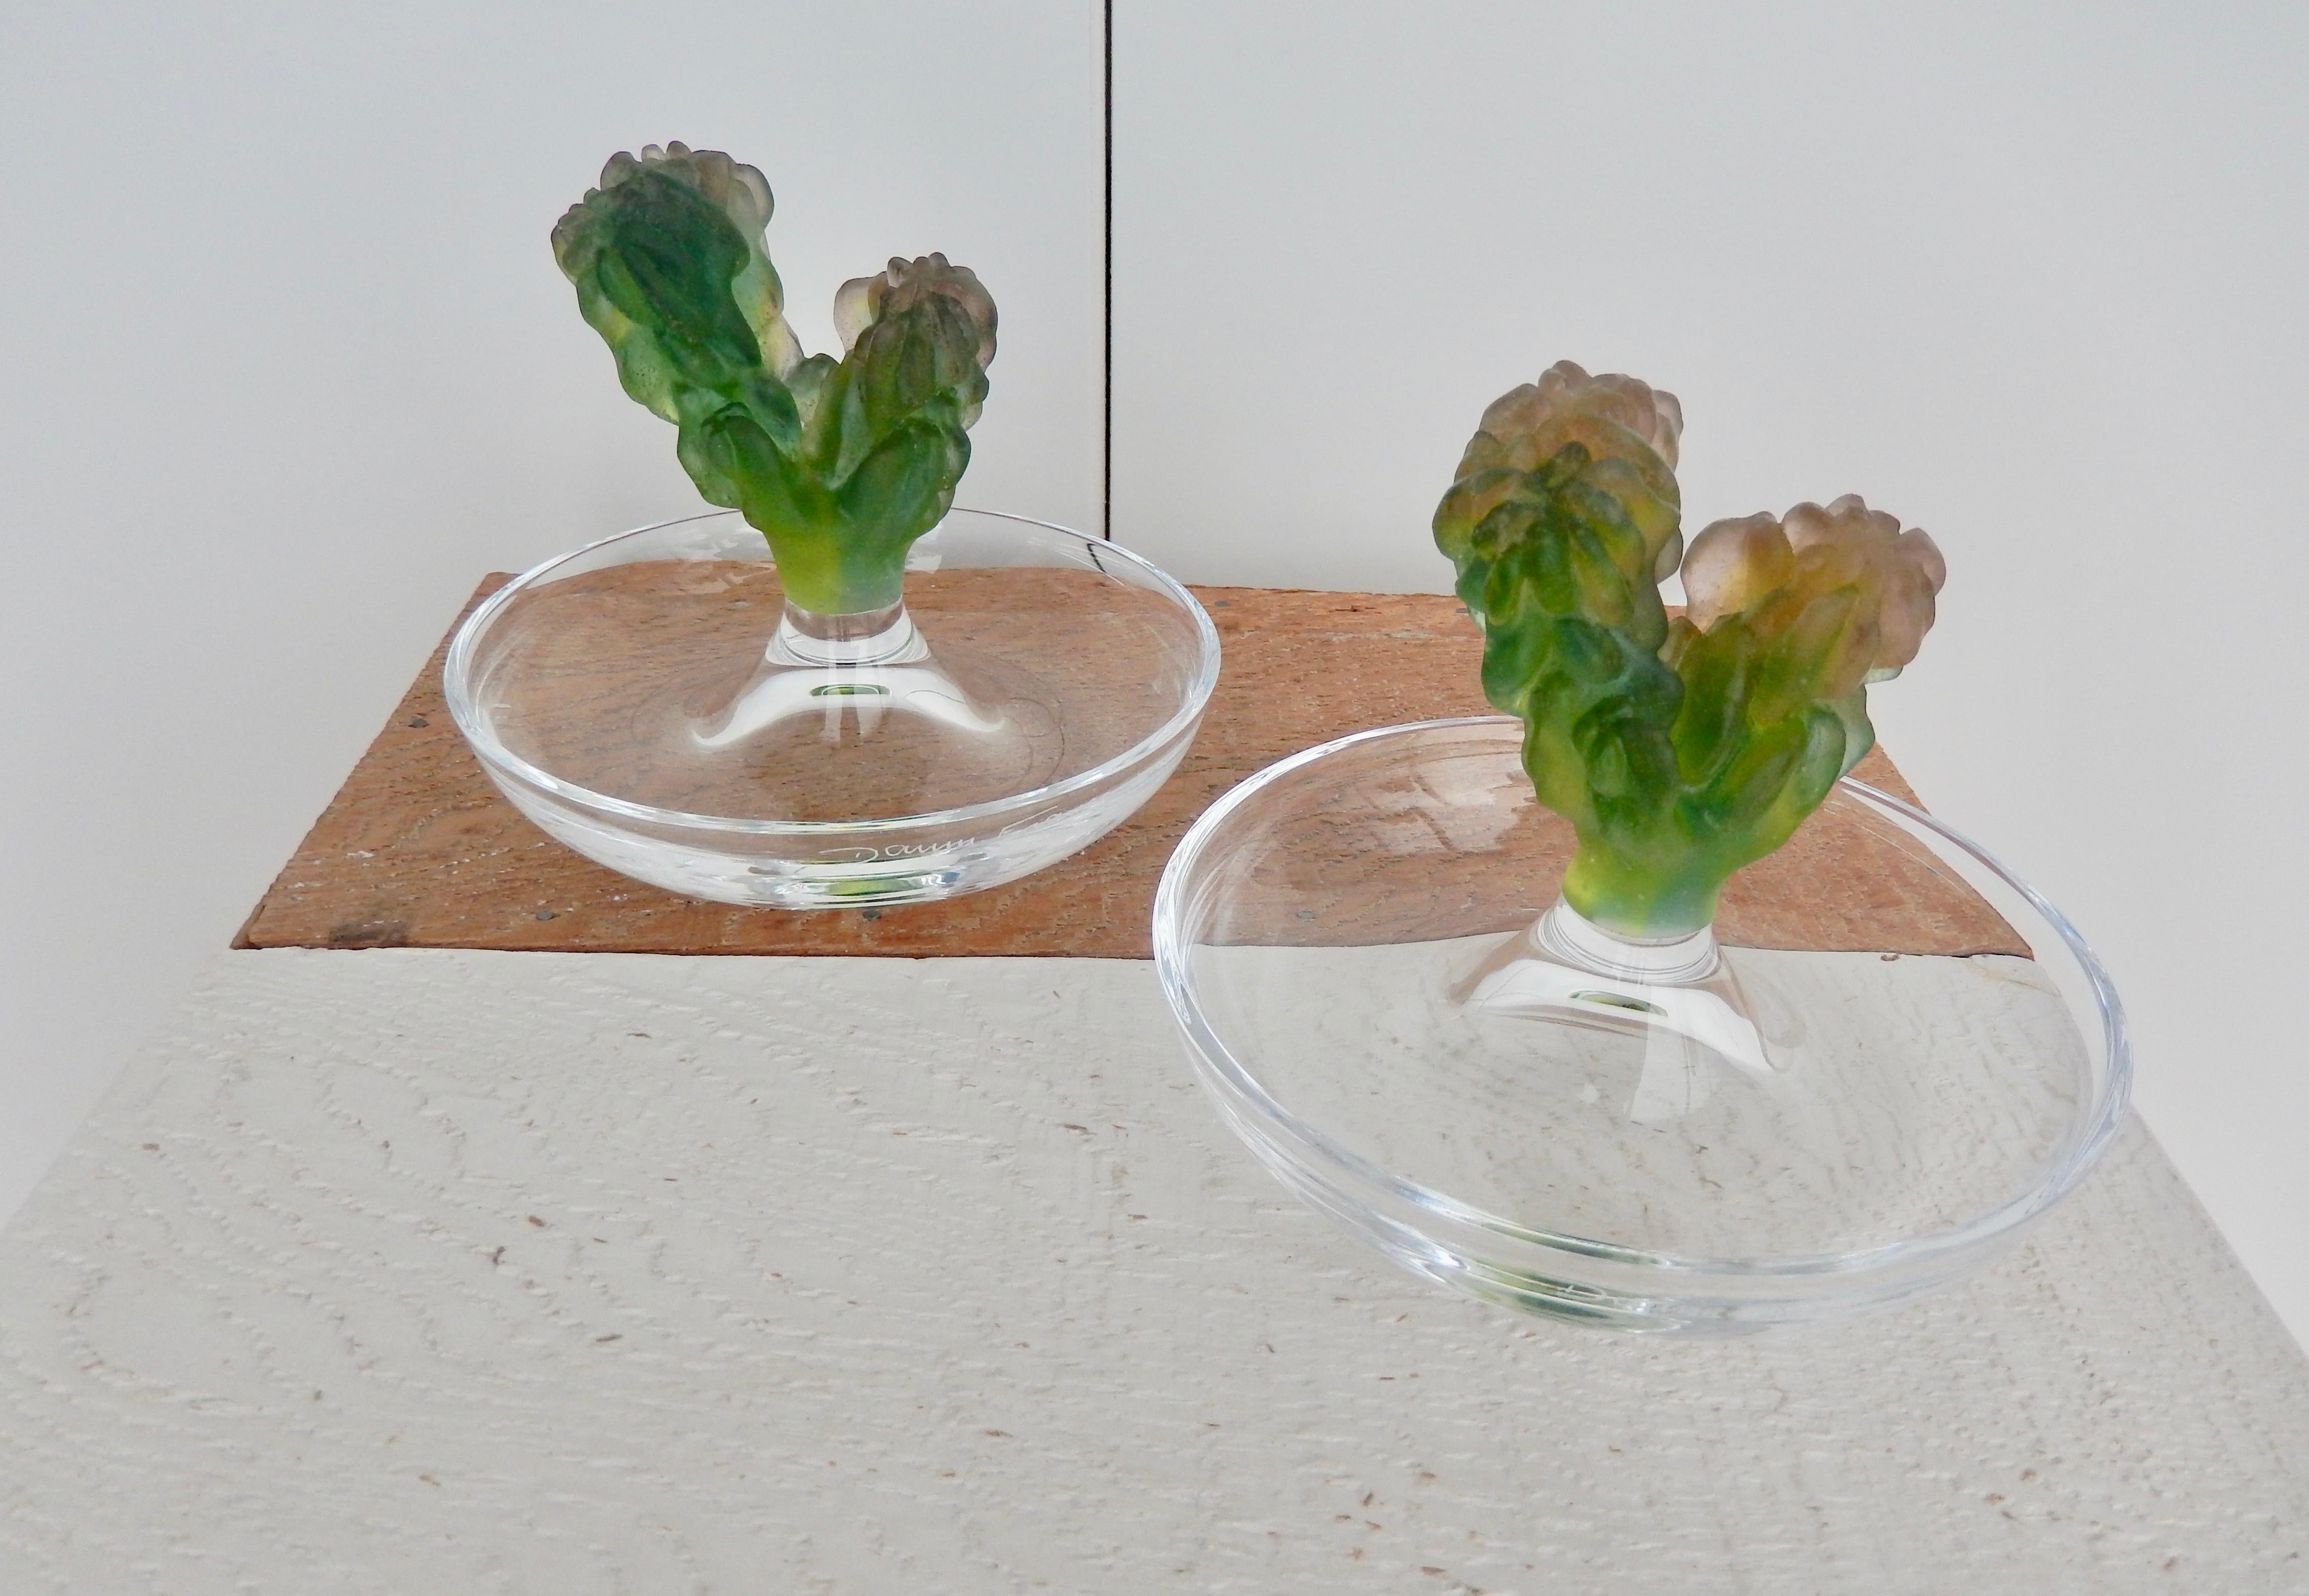 Modern 1980s Pair of Daum Pate de Verre Cactus Dishes by Hilton McConnico For Sale